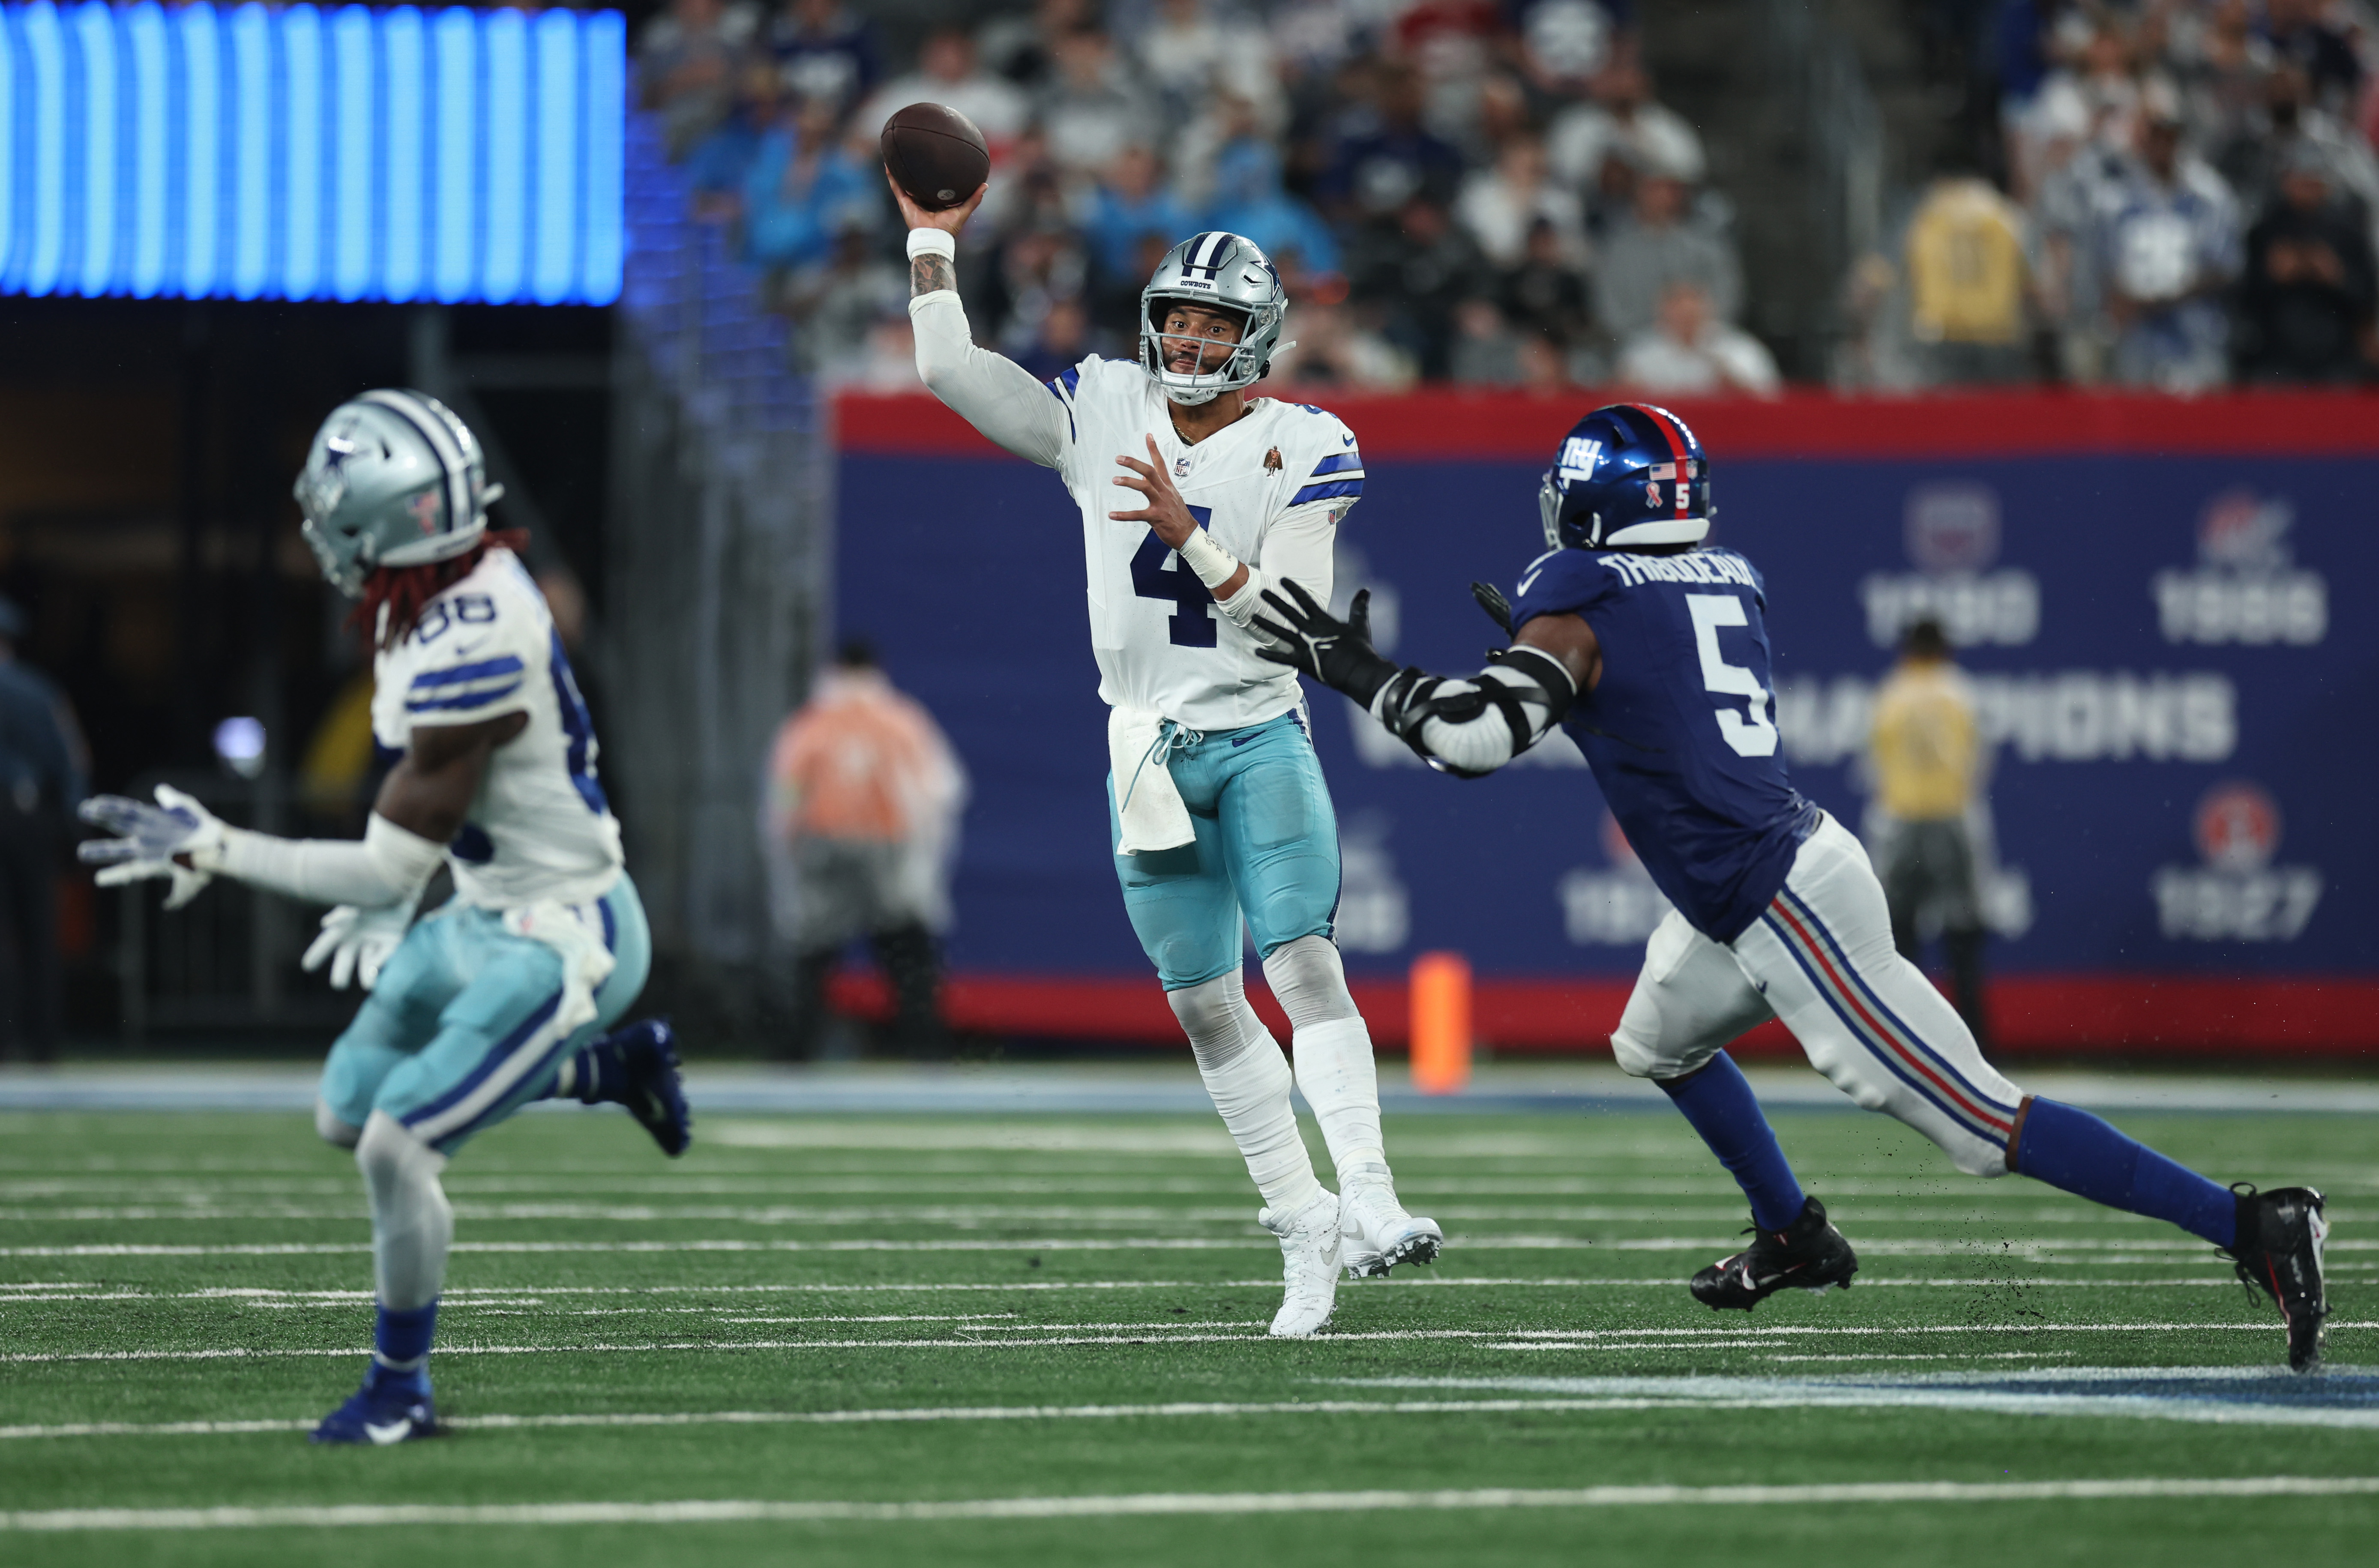 Cowboys kick off season with win against Giants